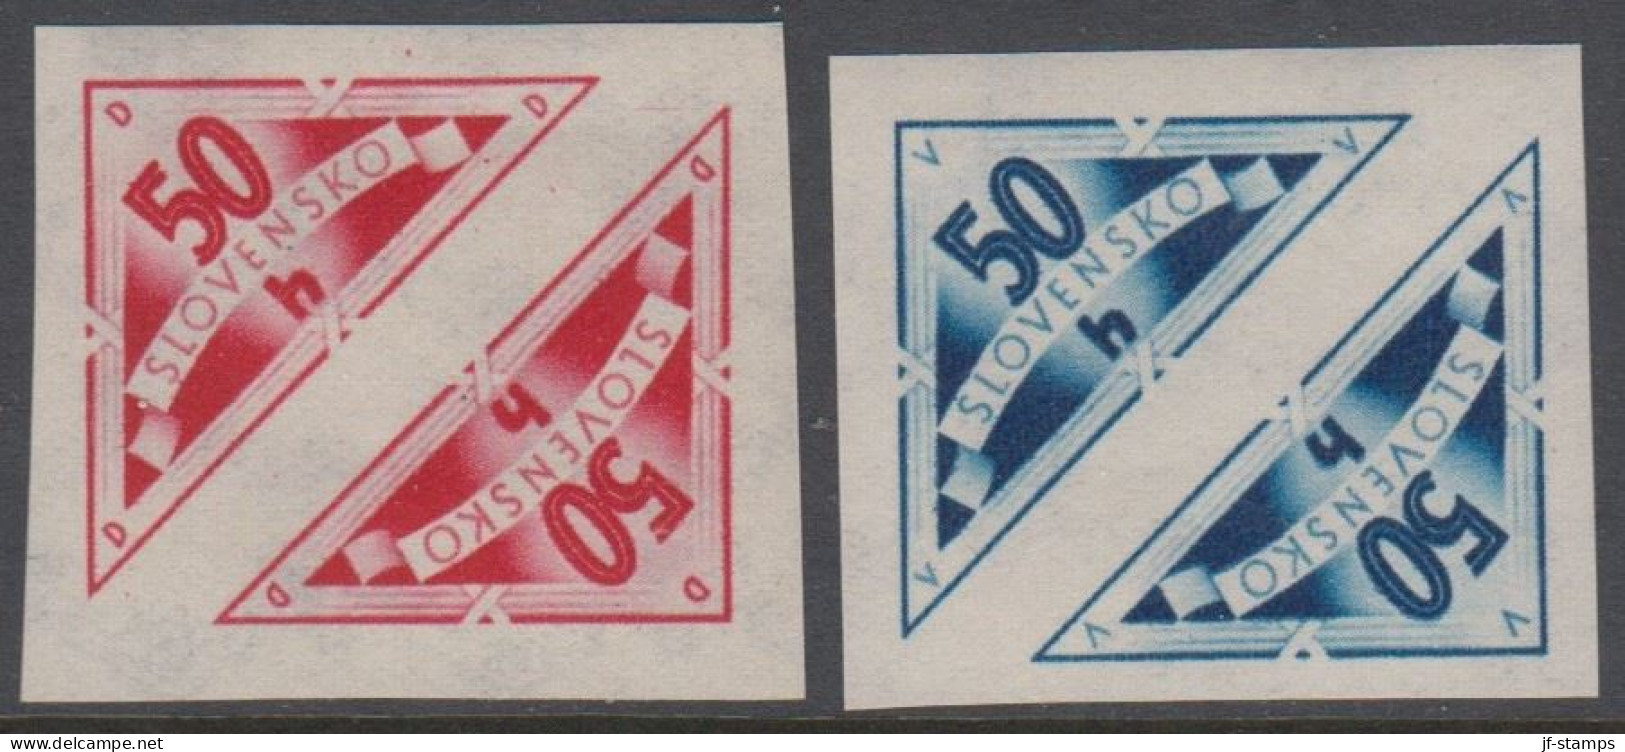 1940. SLOVENSKO Complete Set Of 2 Stamps. Never Hinged. (Michel 79-80) - JF418466 - Used Stamps